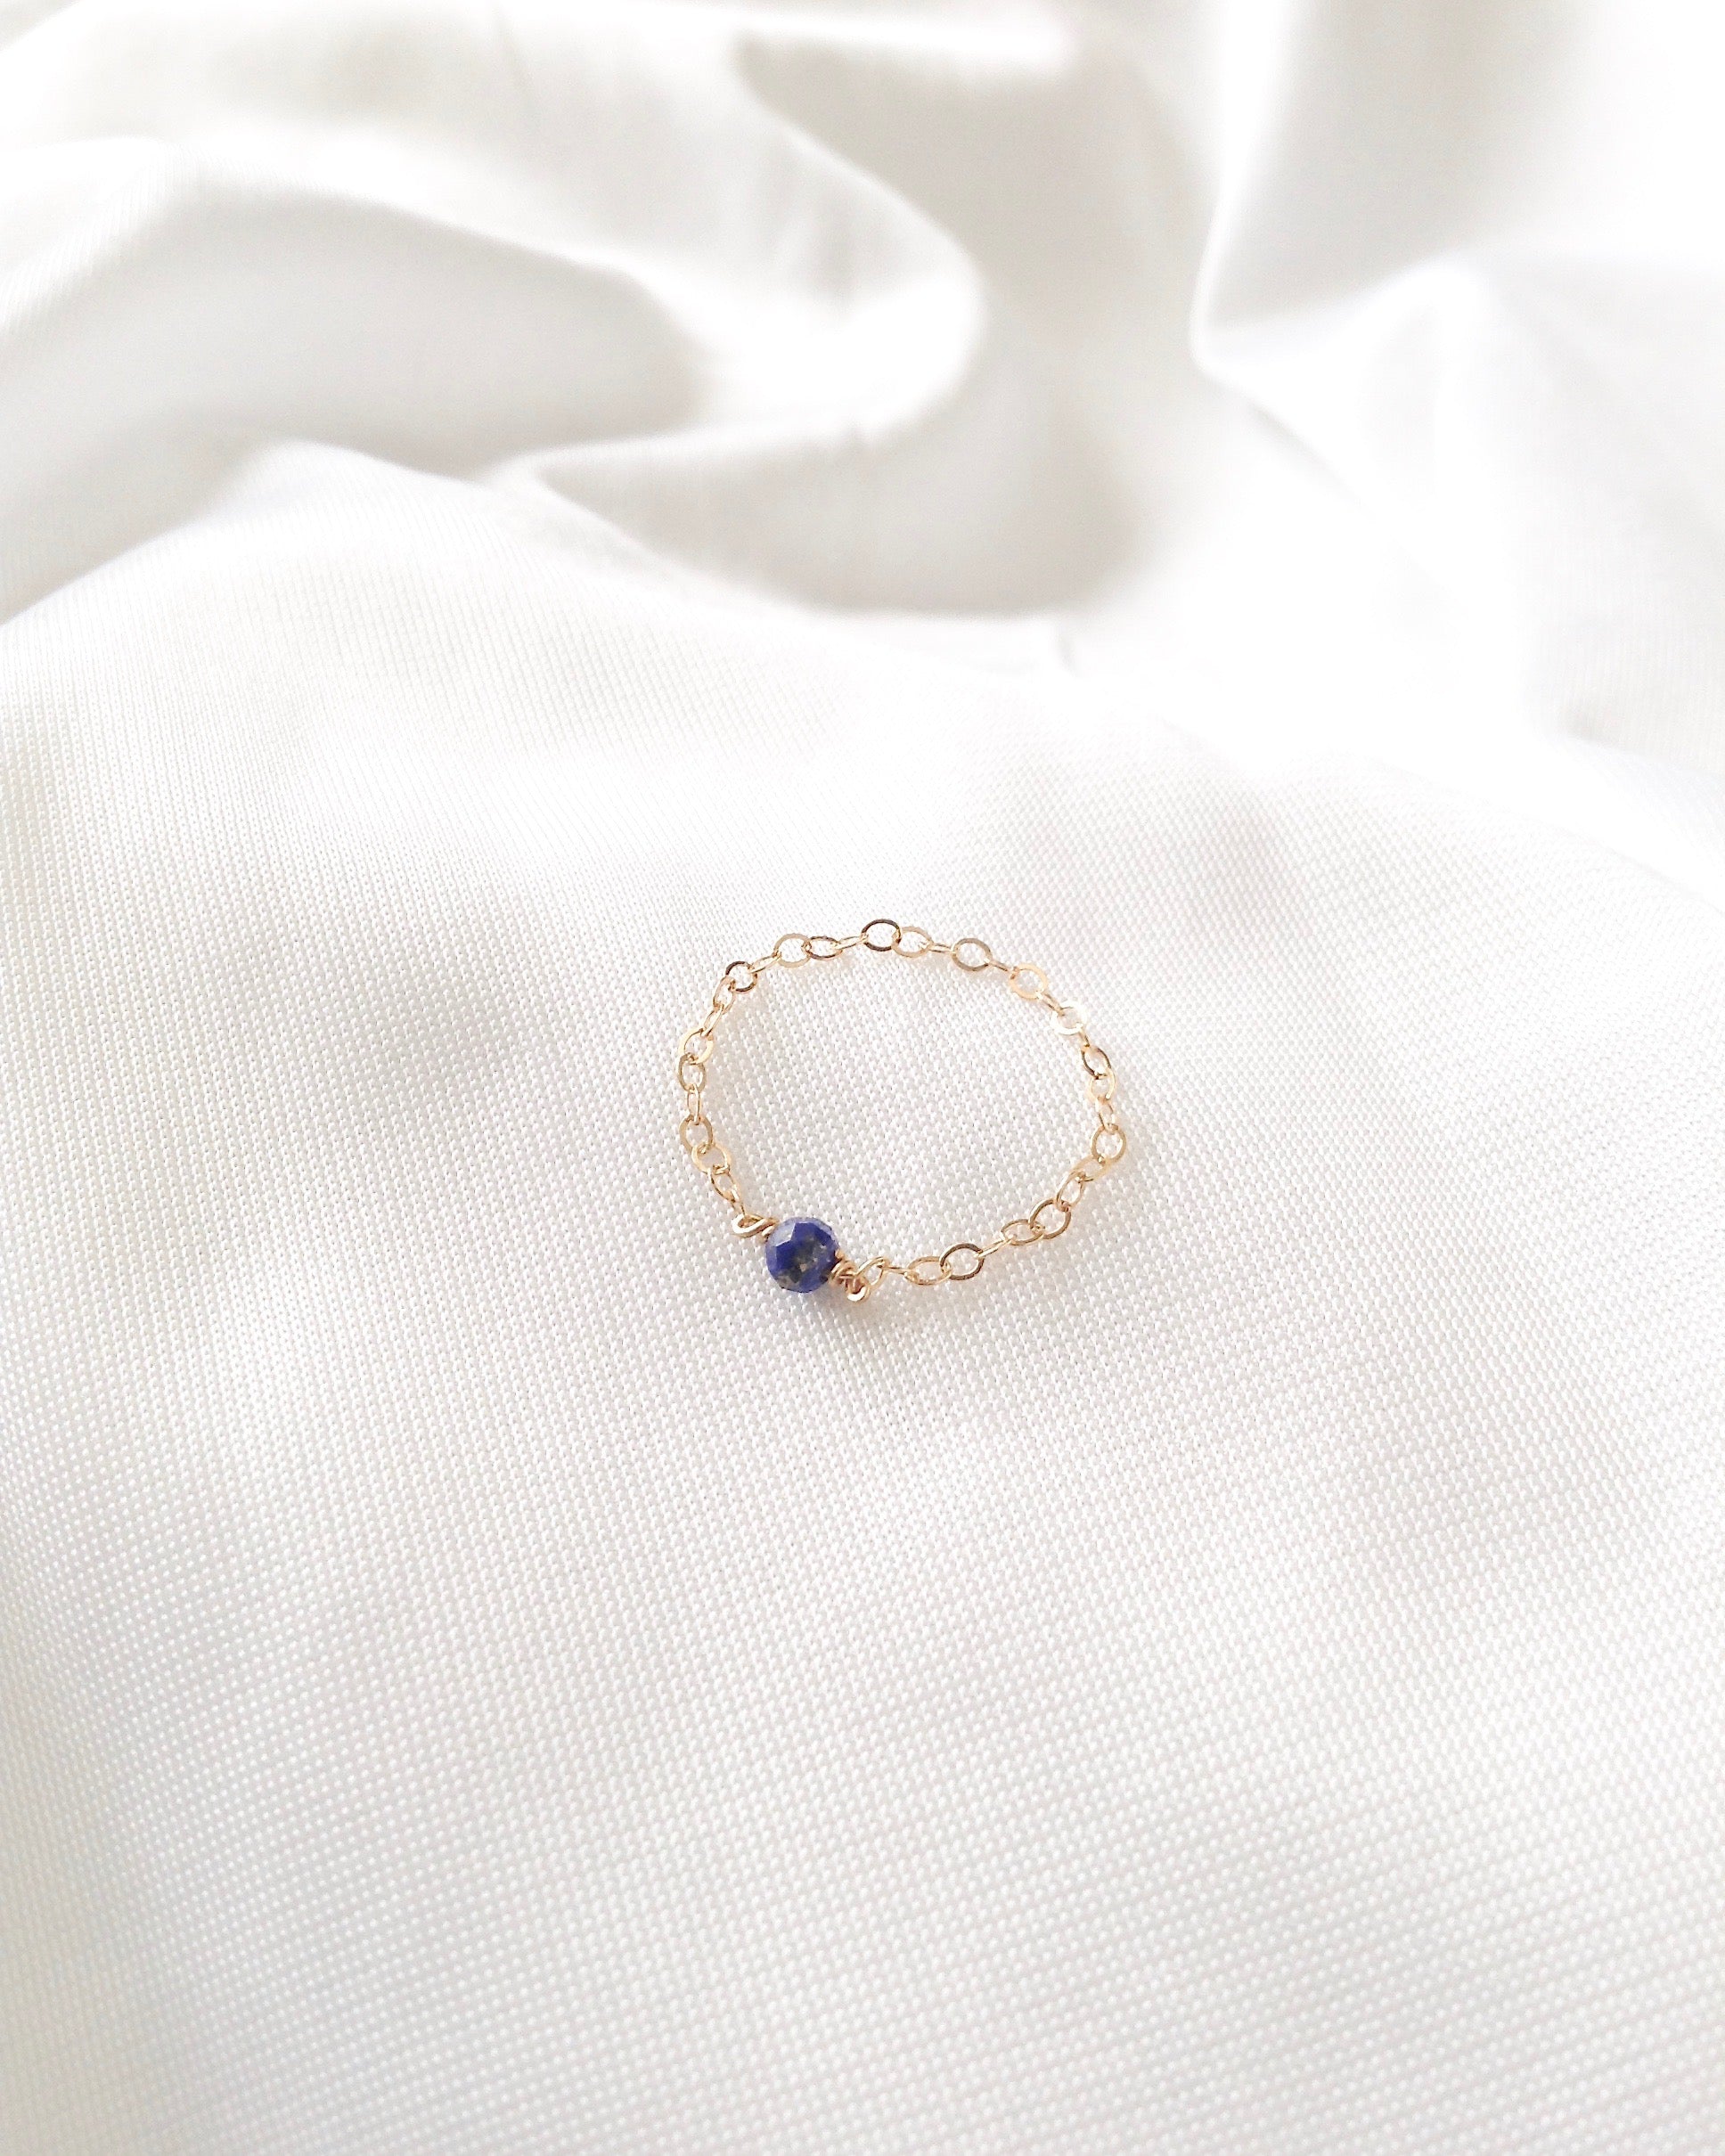 Small Lapis Lazuli Minimalist Delicate Gemstone Ring in Gold Filled or Sterling Silver | IB Jewelry